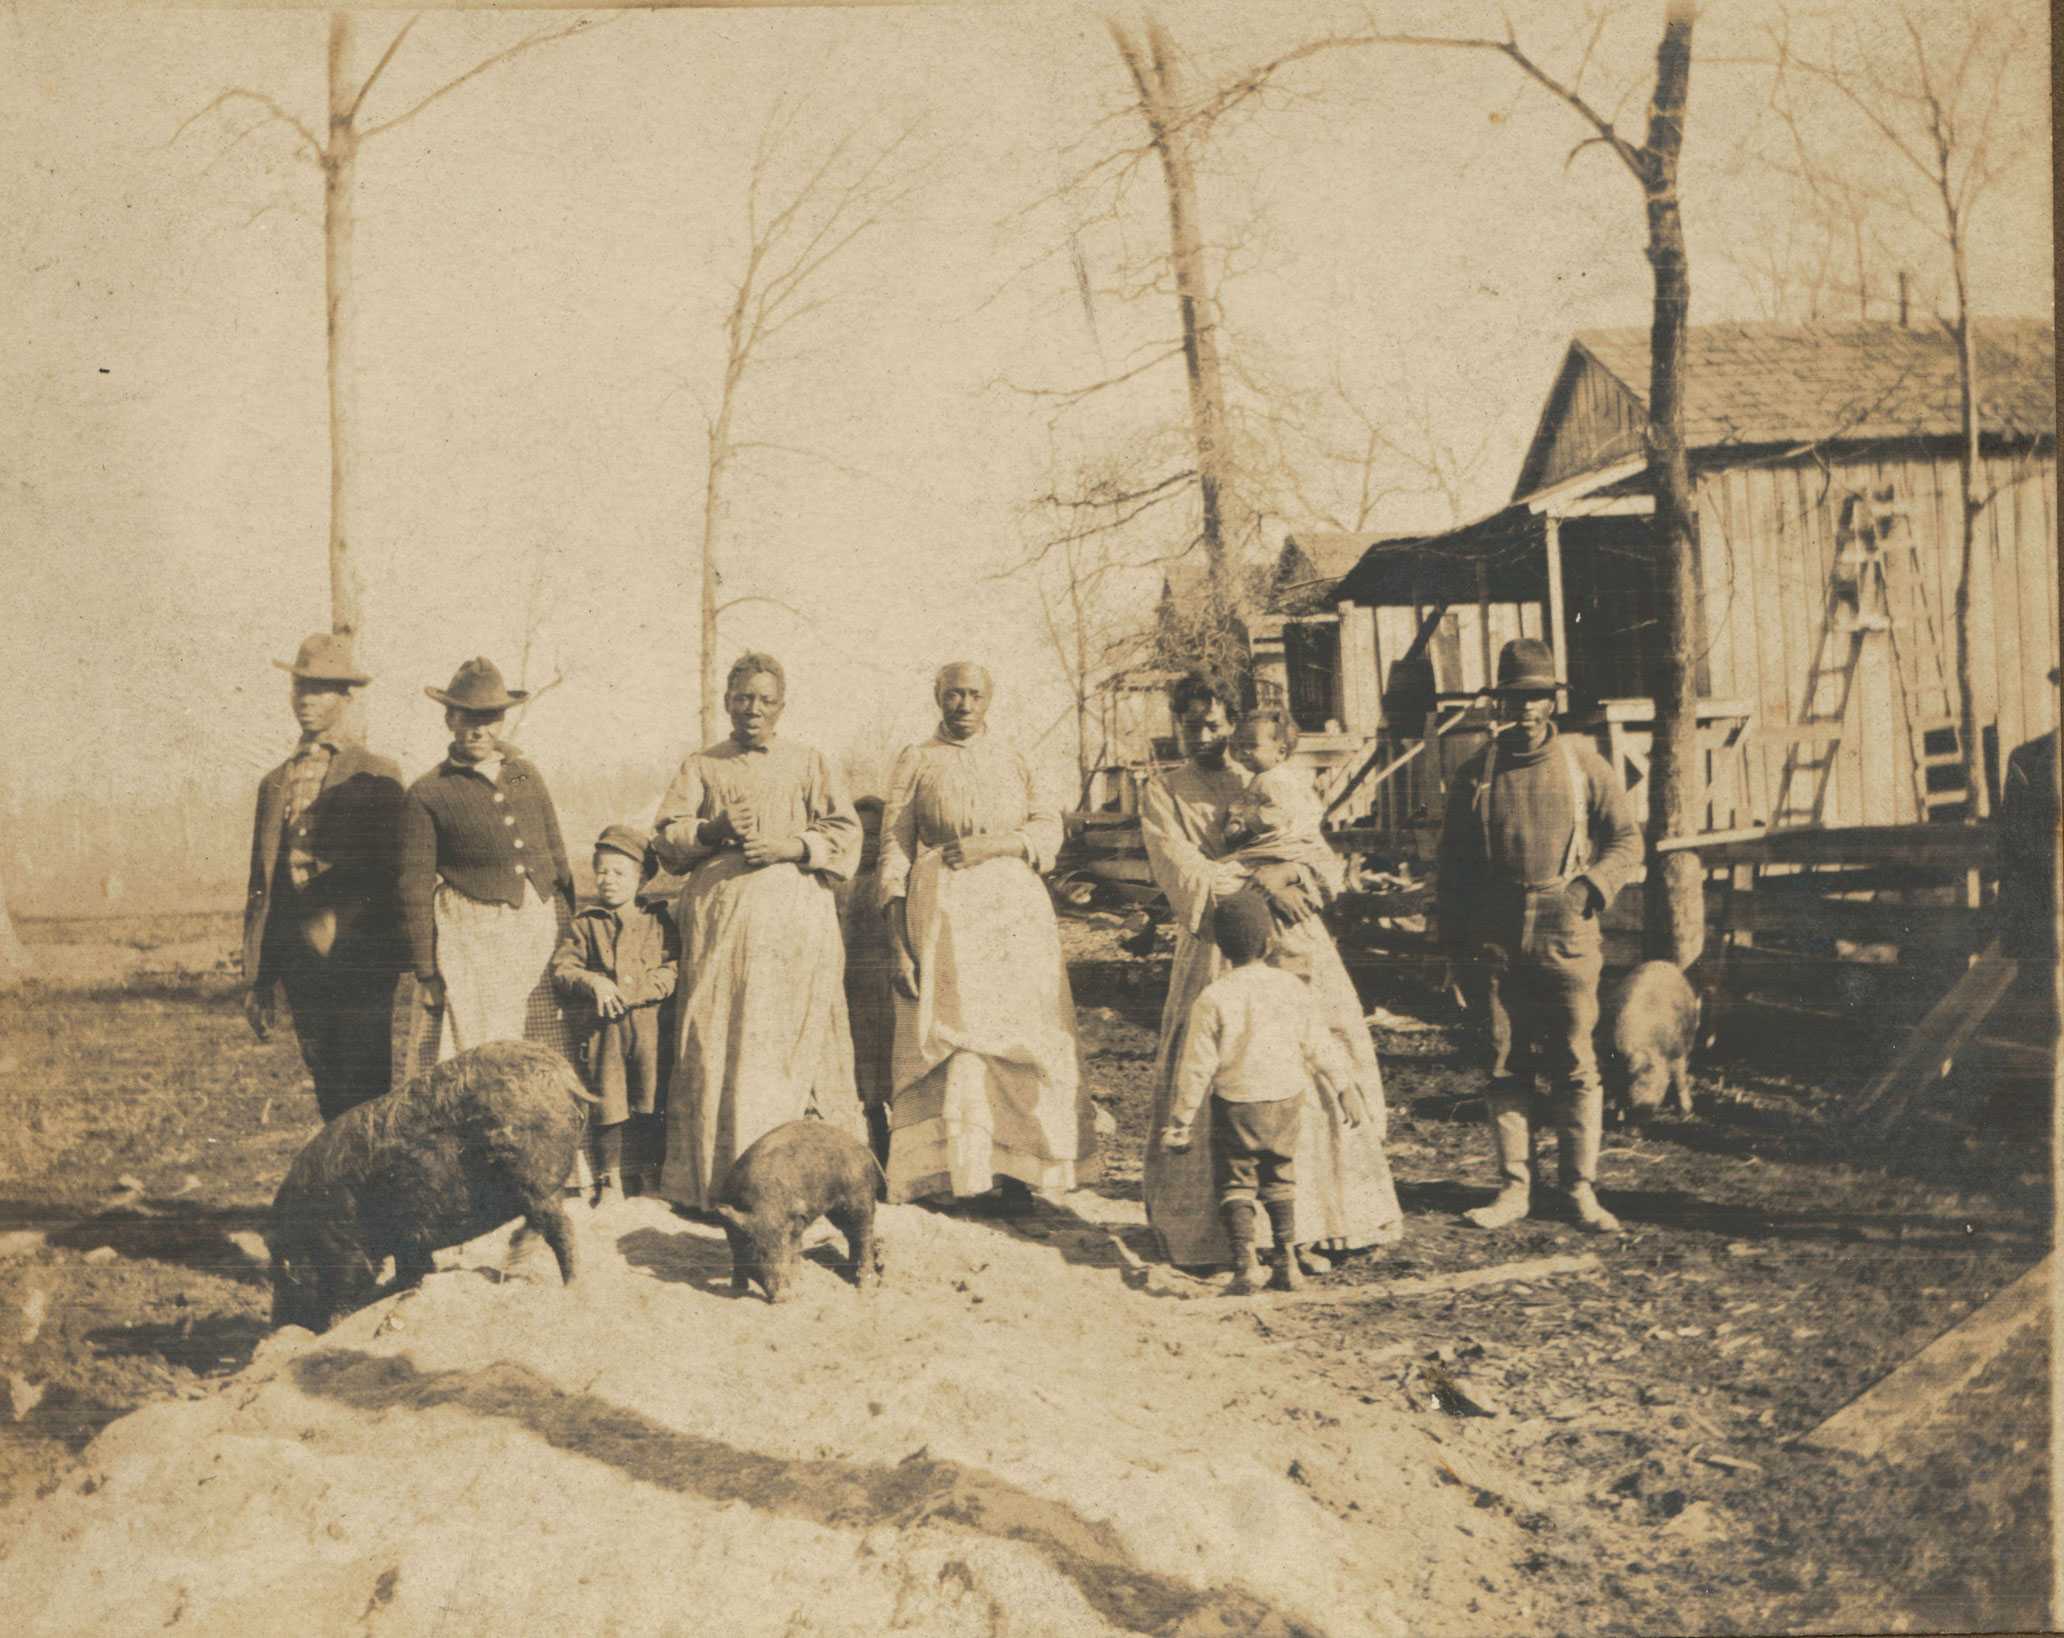 An albumen print of a sharecropping family